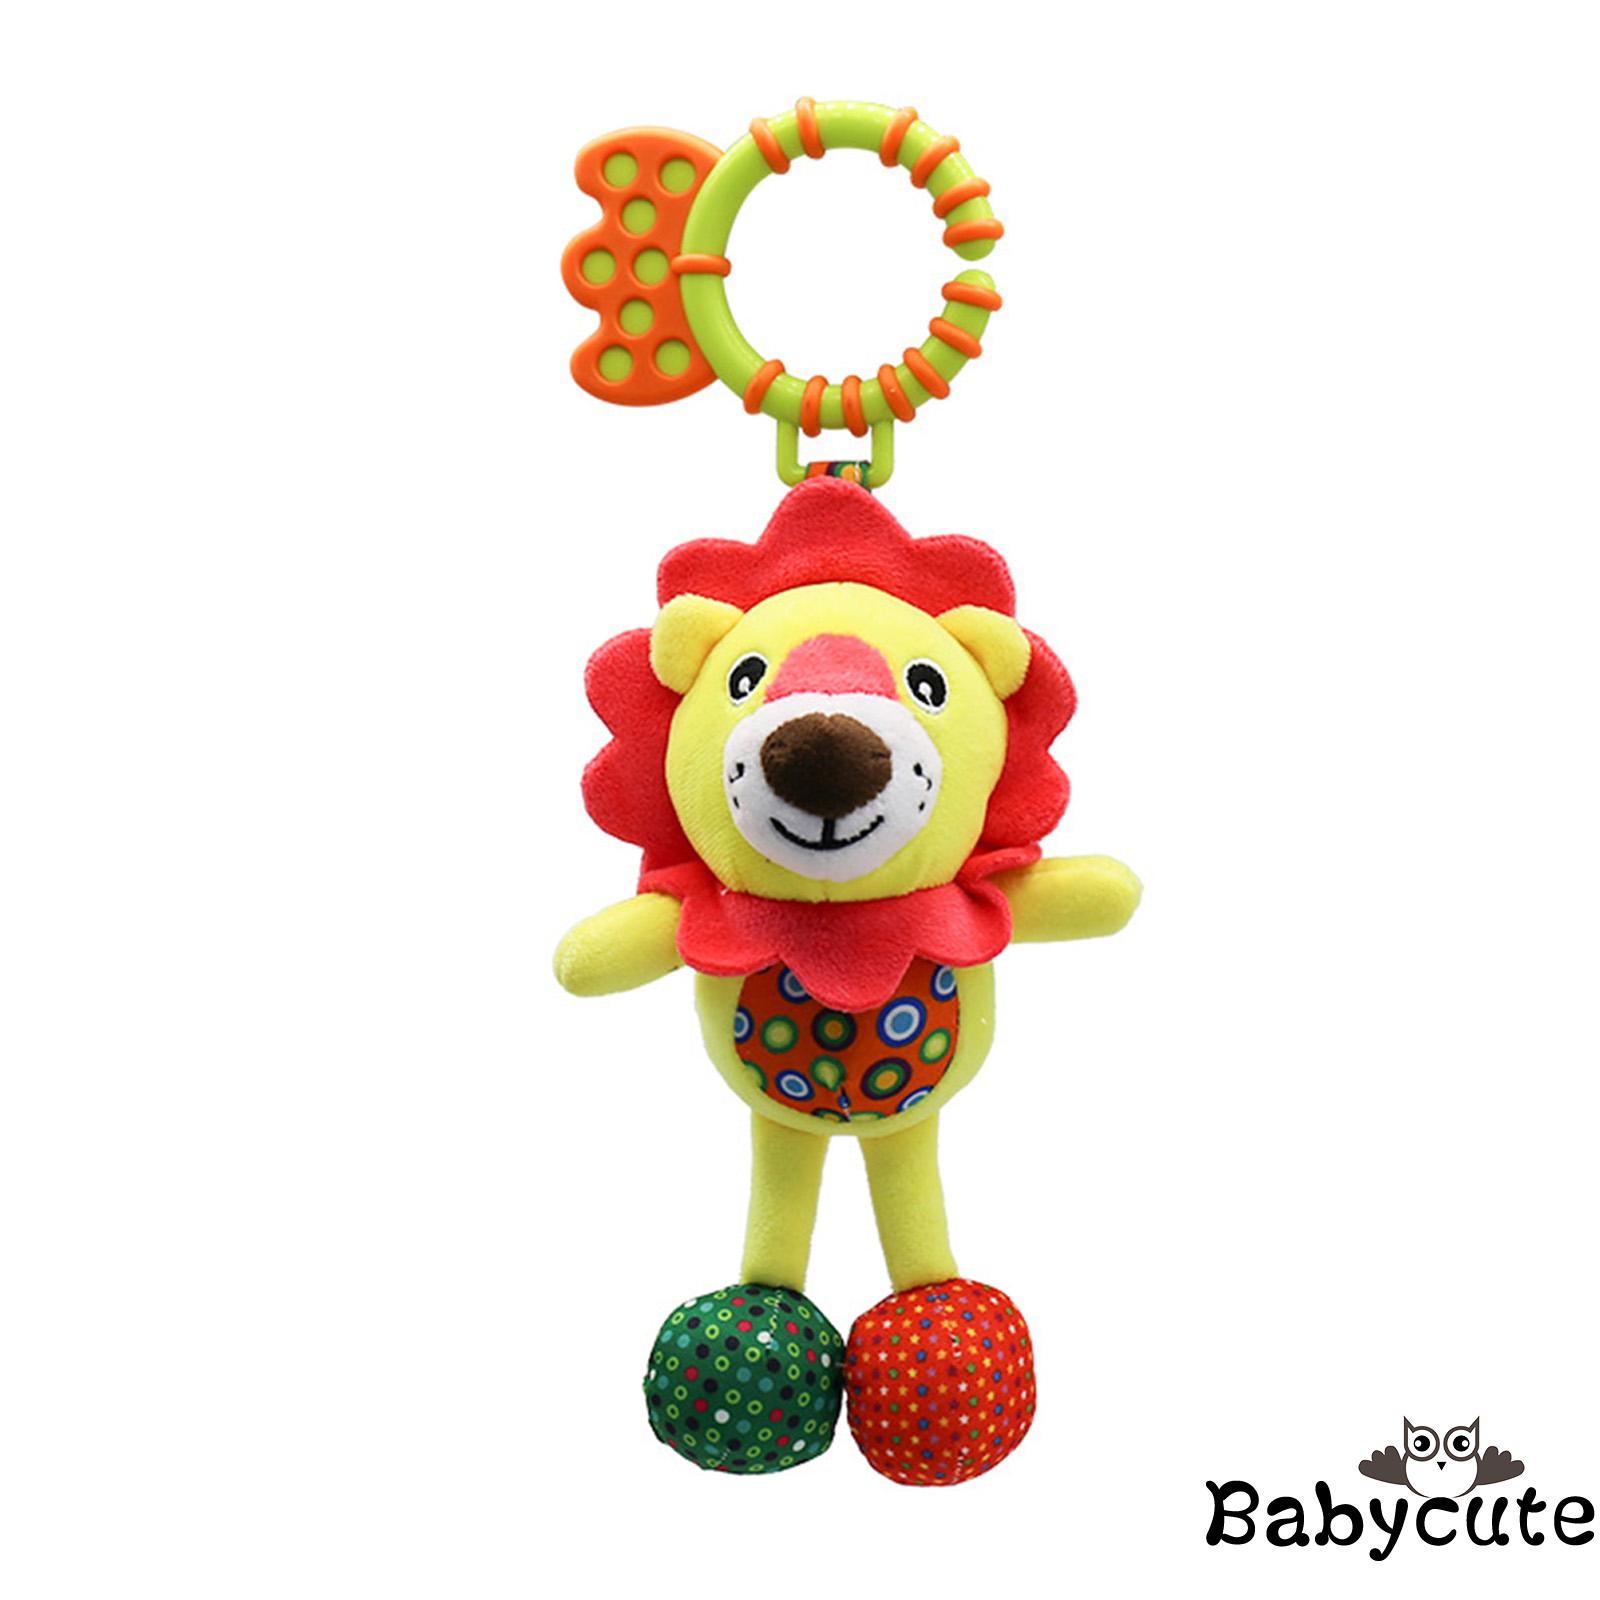 B-BBaby Hanging Toys Stuffed Animal with C-Clip Ring Activity Development Toy for Crib Stroller Carseat Decoration